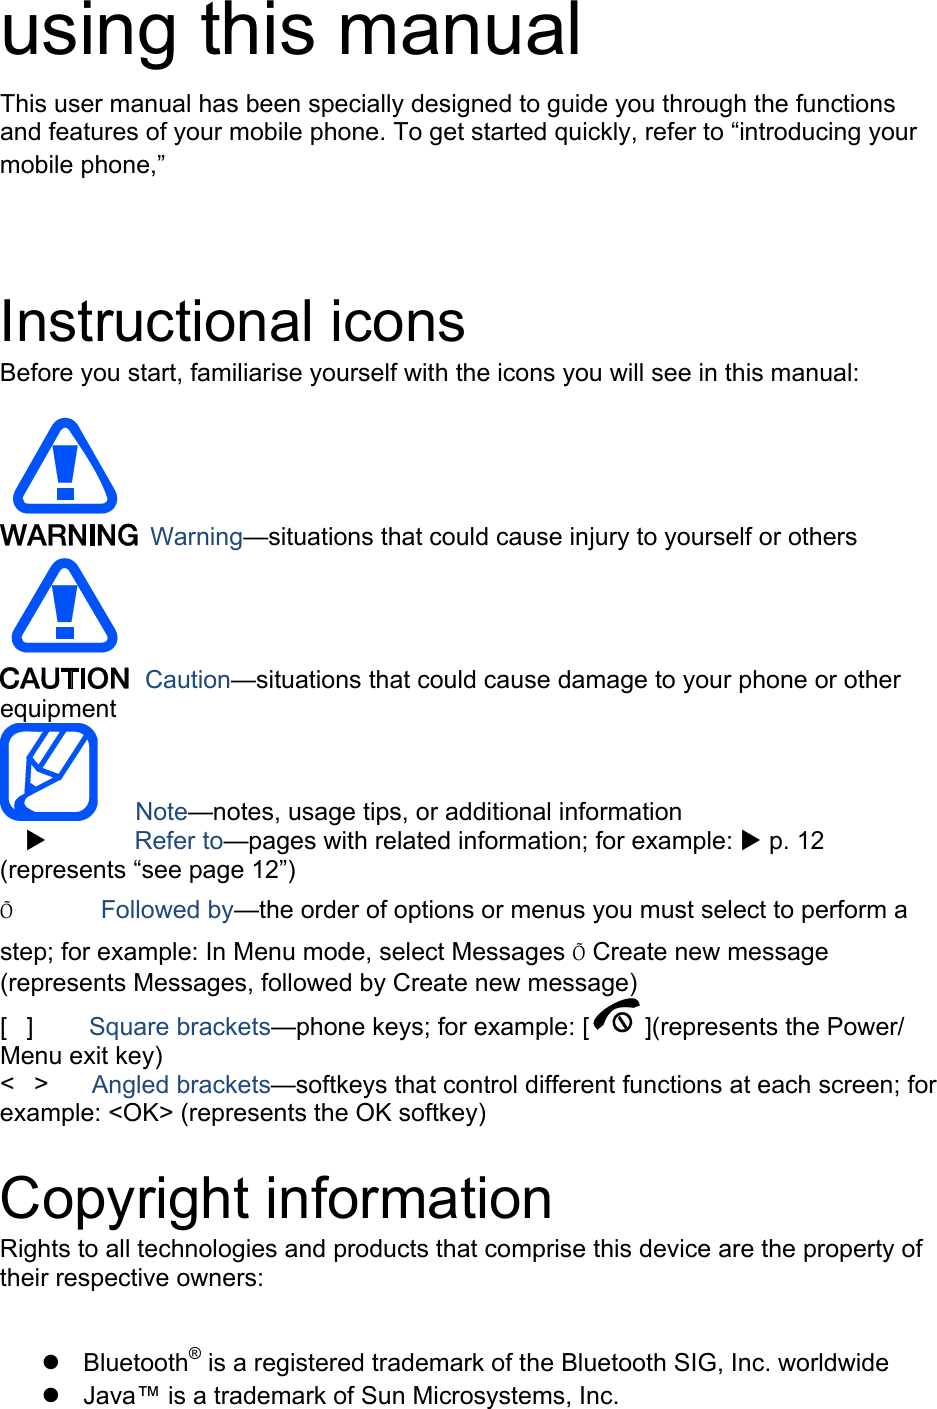 using this manual This user manual has been specially designed to guide you through the functions and features of your mobile phone. To get started quickly, refer to “introducing your mobile phone,”    Instructional icons Before you start, familiarise yourself with the icons you will see in this manual:     Warning—situations that could cause injury to yourself or others  Caution—situations that could cause damage to your phone or other equipment    Note—notes, usage tips, or additional information   X       Refer to—pages with related information; for example: X p. 12 (represents “see page 12”) Õ       Followed by—the order of options or menus you must select to perform a step; for example: In Menu mode, select Messages Õ Create new message (represents Messages, followed by Create new message) [  ]     Square brackets—phone keys; for example: [ ](represents the Power/ Menu exit key) &lt;  &gt;    Angled brackets—softkeys that control different functions at each screen; for example: &lt;OK&gt; (represents the OK softkey)  Copyright information Rights to all technologies and products that comprise this device are the property of their respective owners:  z Bluetooth® is a registered trademark of the Bluetooth SIG, Inc. worldwide z  Java™ is a trademark of Sun Microsystems, Inc. 